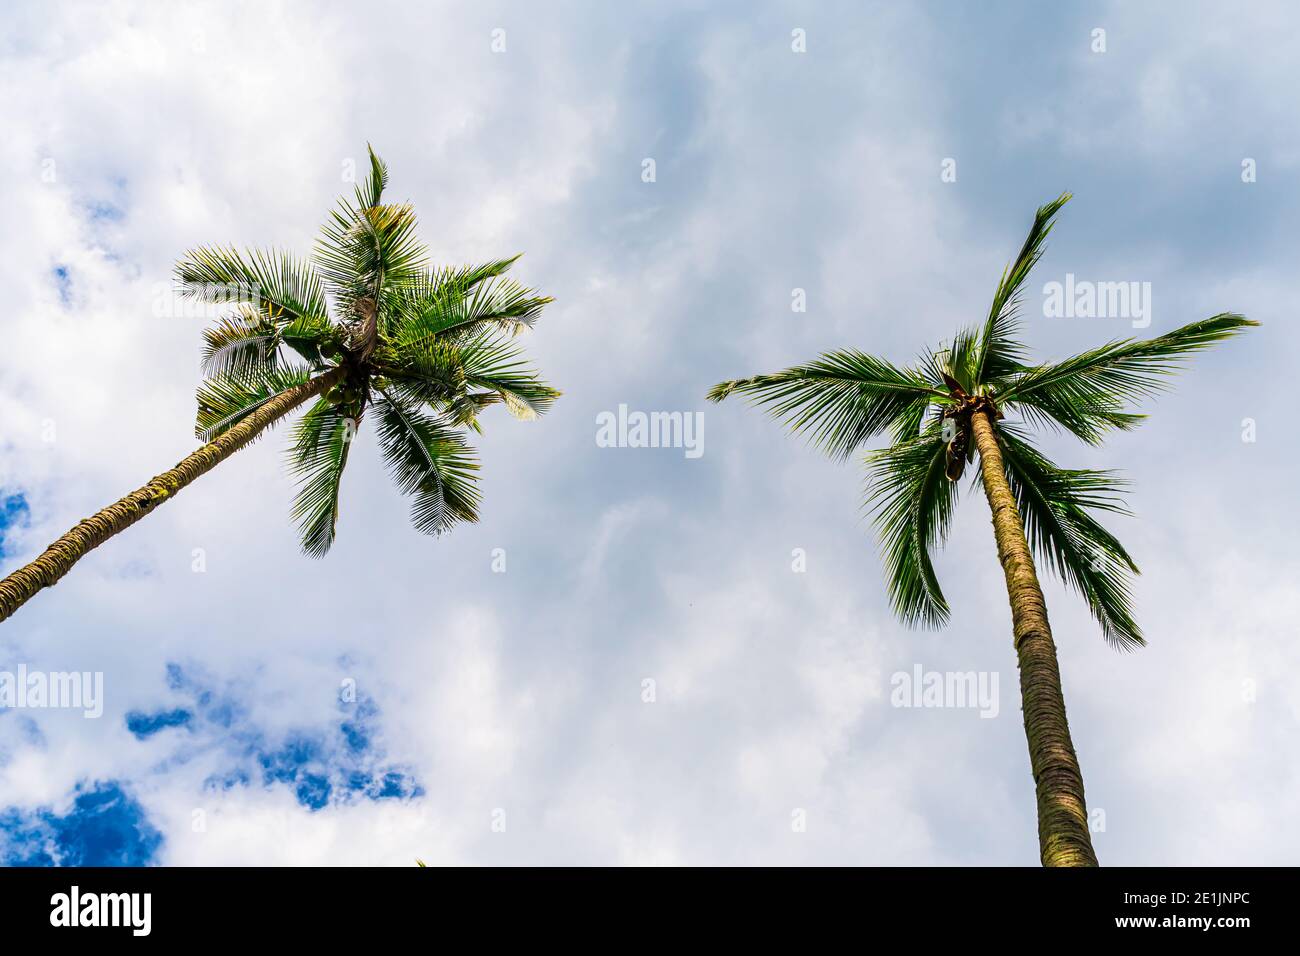 Twin Coconut Trees During a Cloudy Day Stock Photo